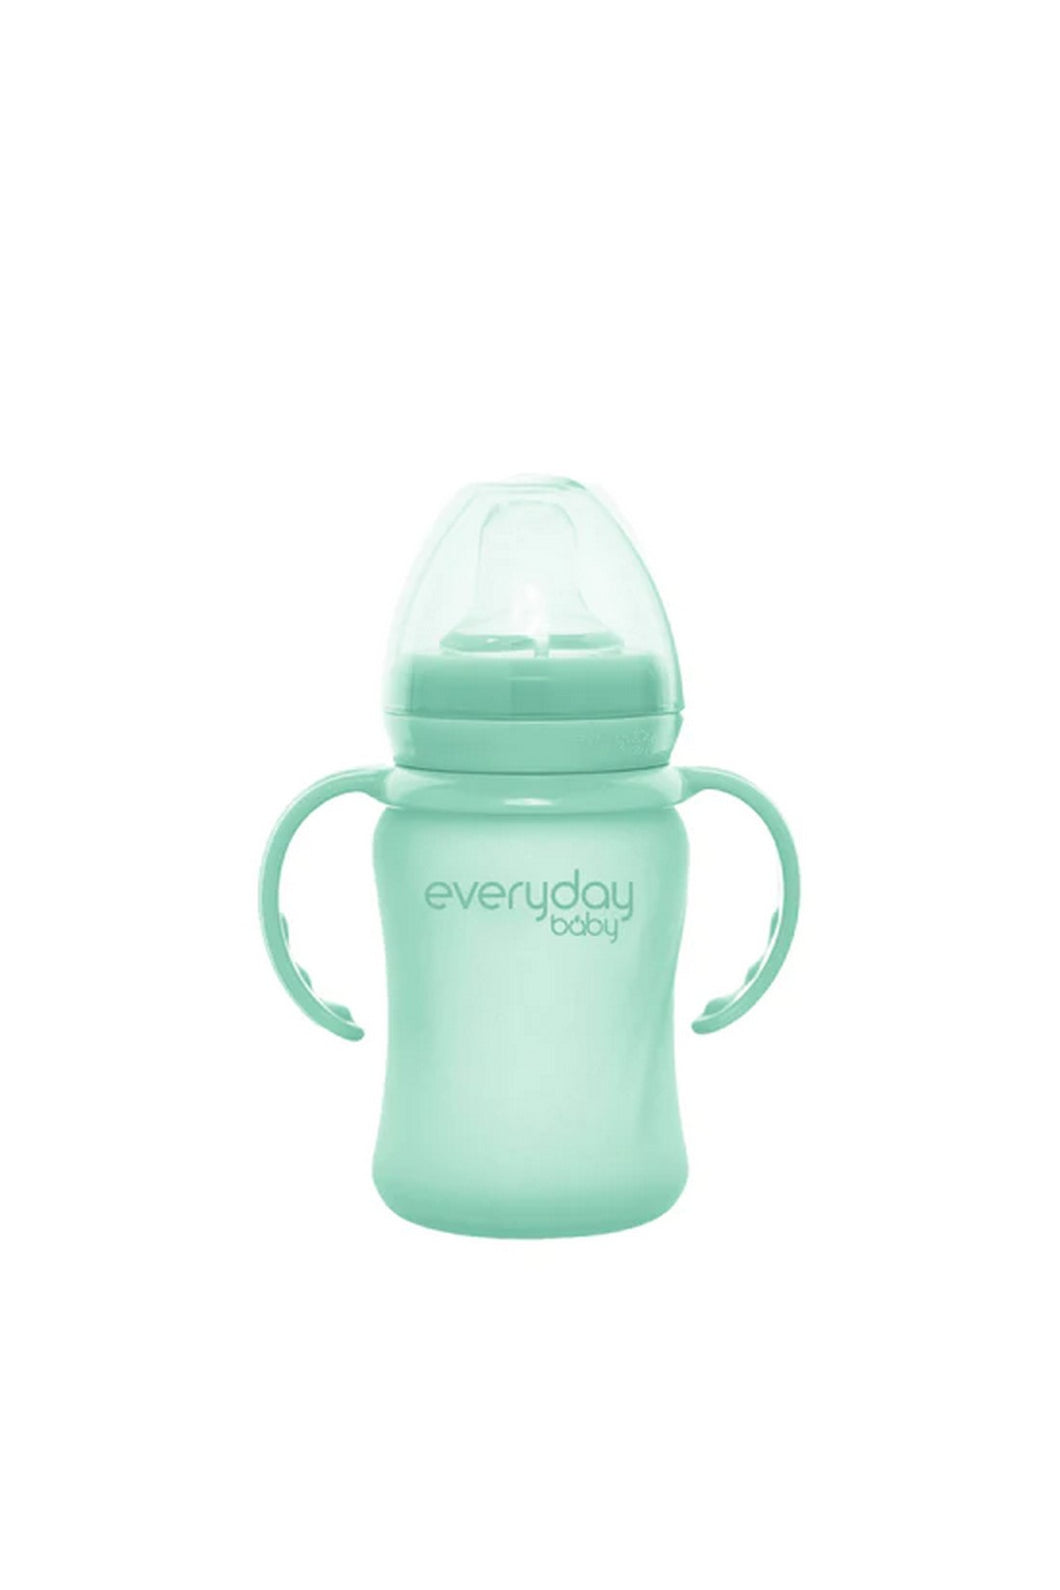 Everyday Baby Sippy Cup Healthy + 150 ml